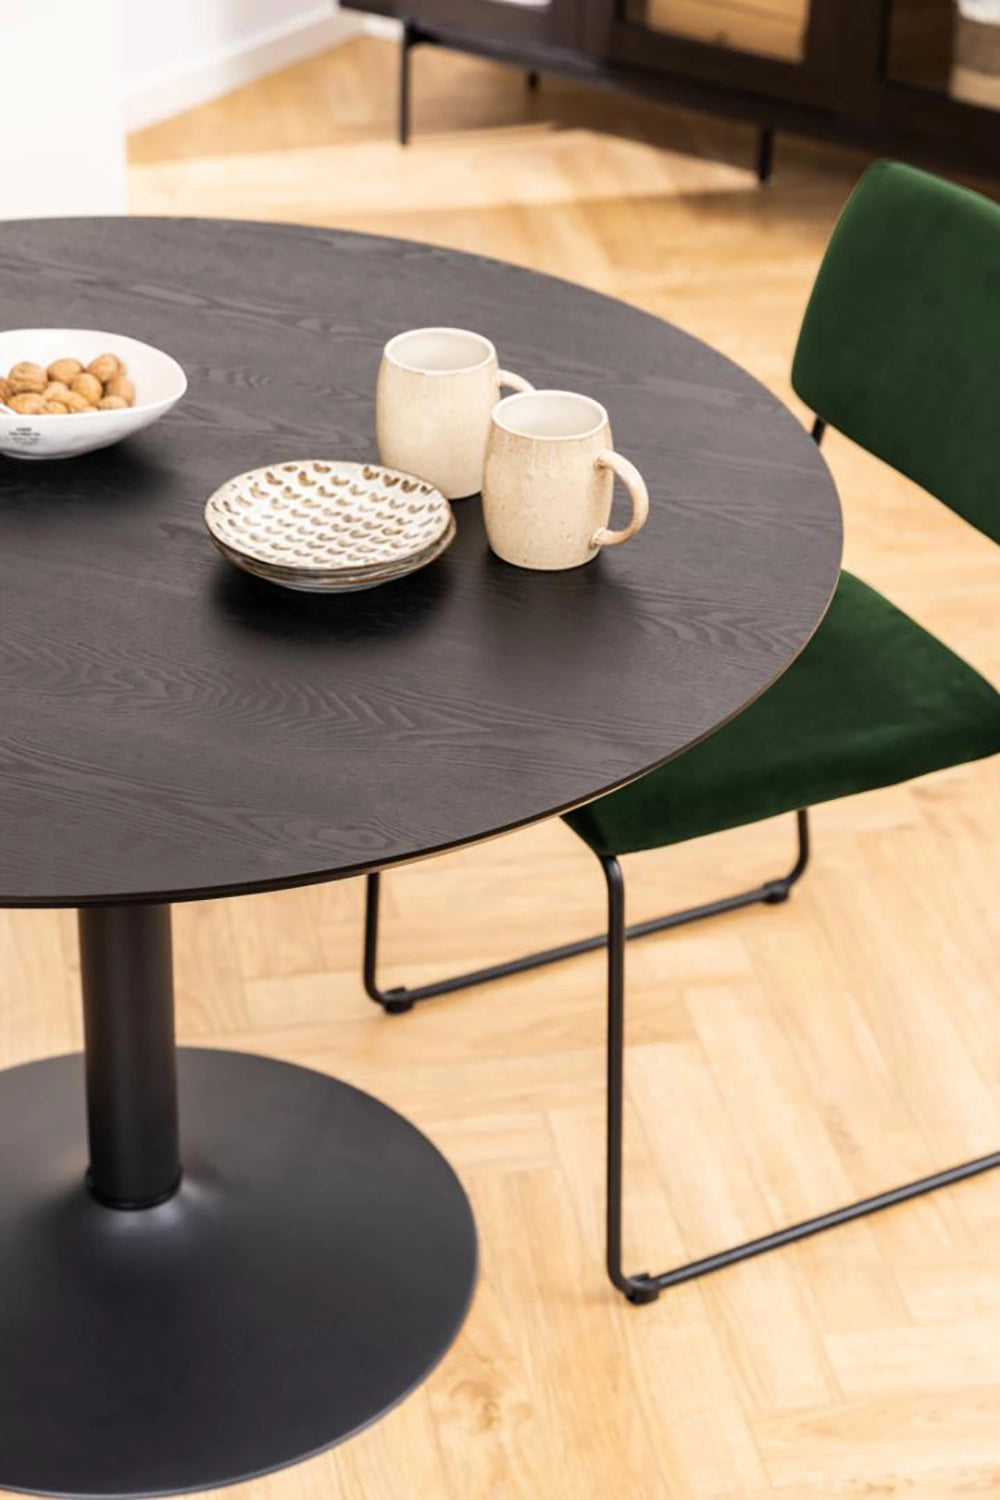 Antonio Round Dining Table in Black Finish with Upholstered Chair and Coffee Cup in Living Room Setting